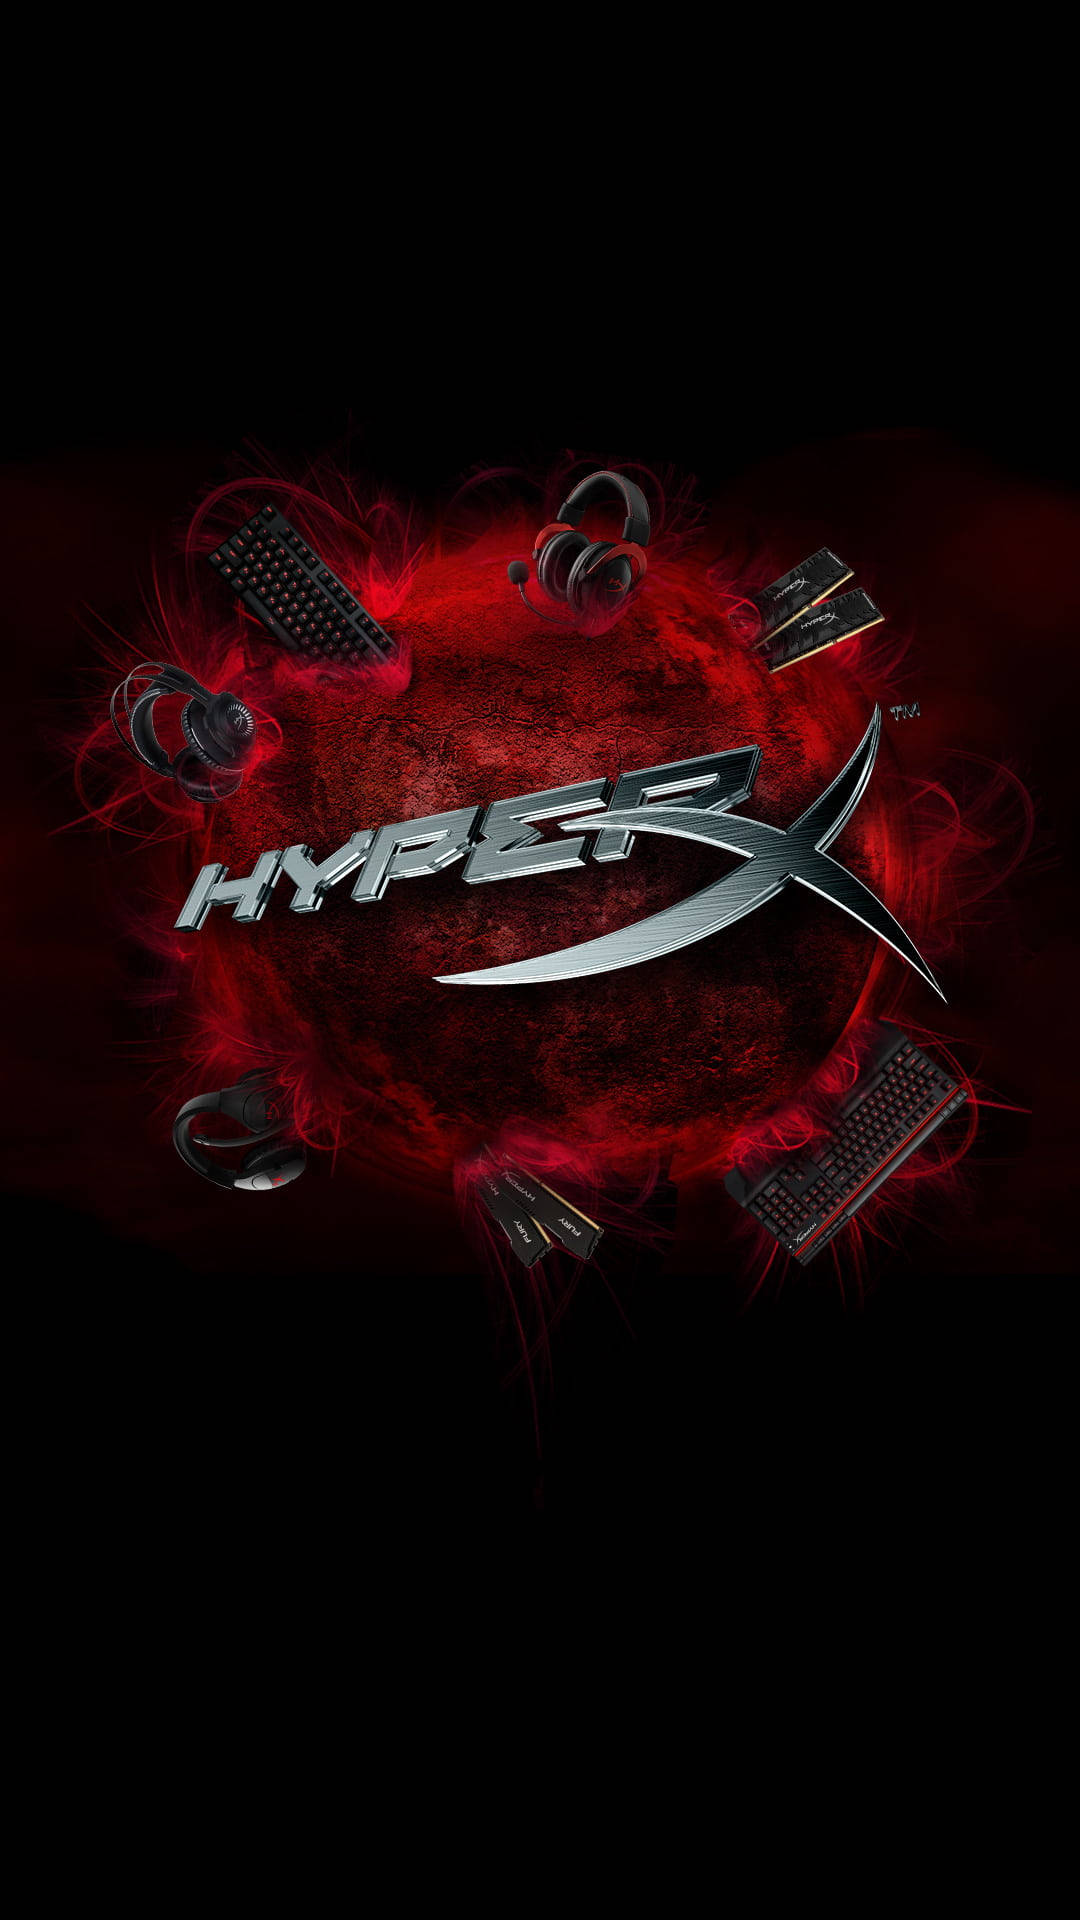 HyperX Black And Red Gaming Wallpaper